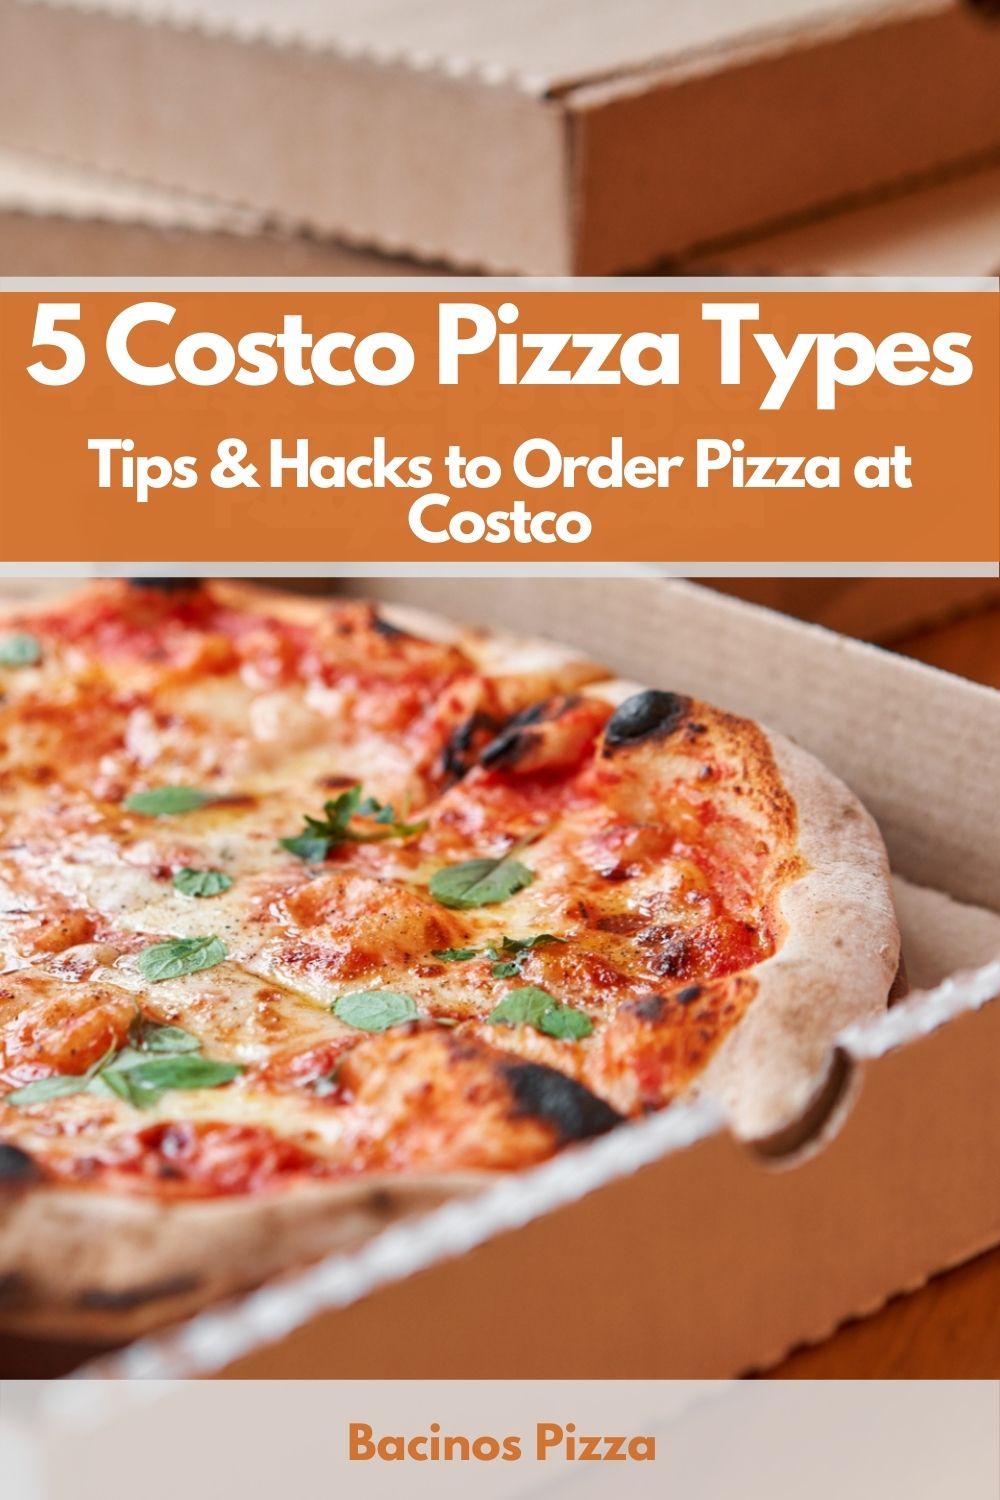 5 Costco Pizza Types Tips & Hacks to Order Pizza at Costco  pin